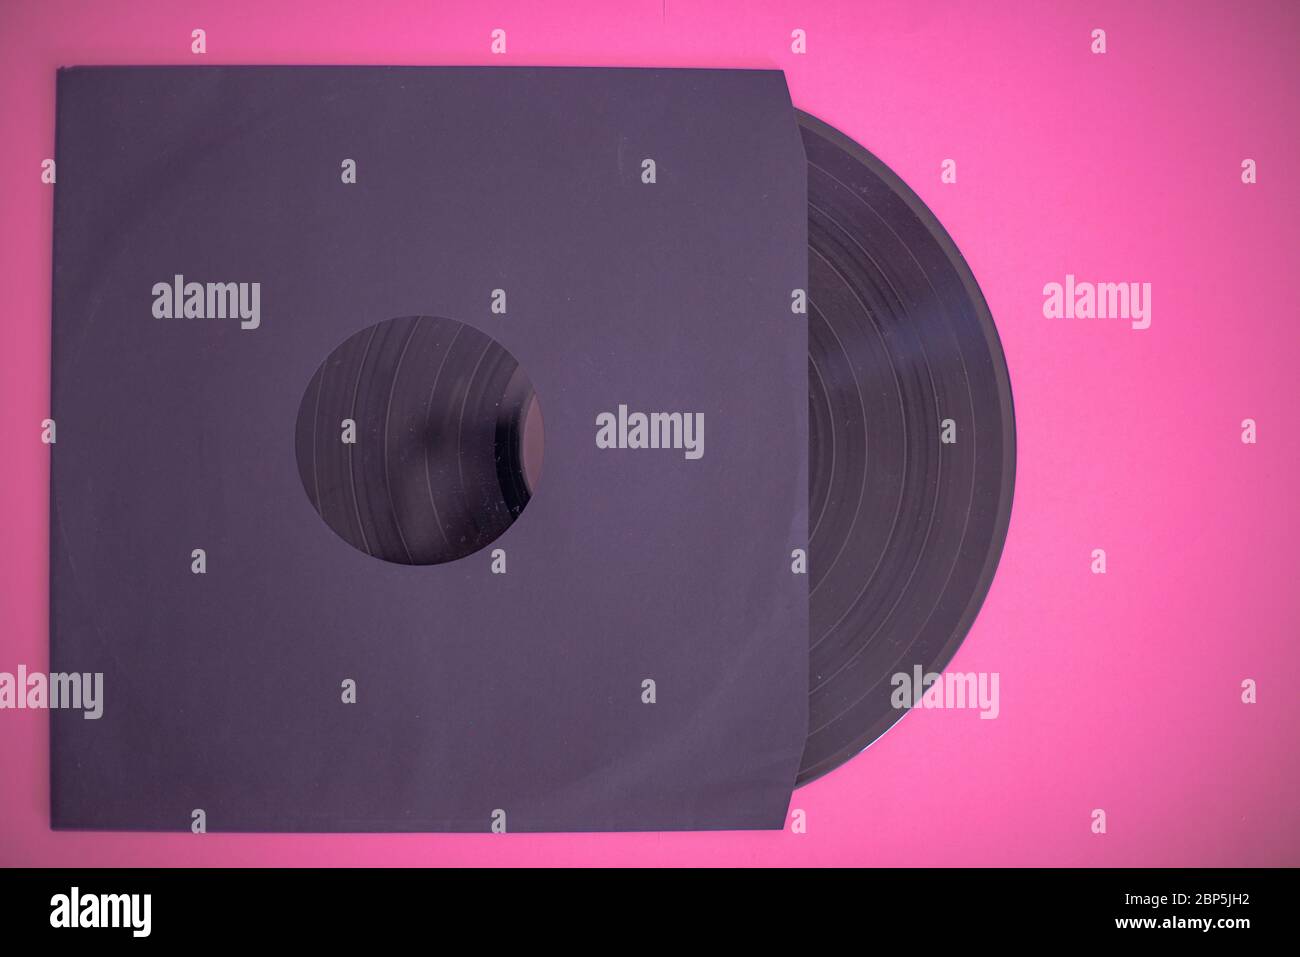 Vinyl record isolated against colorful background Stock Photo